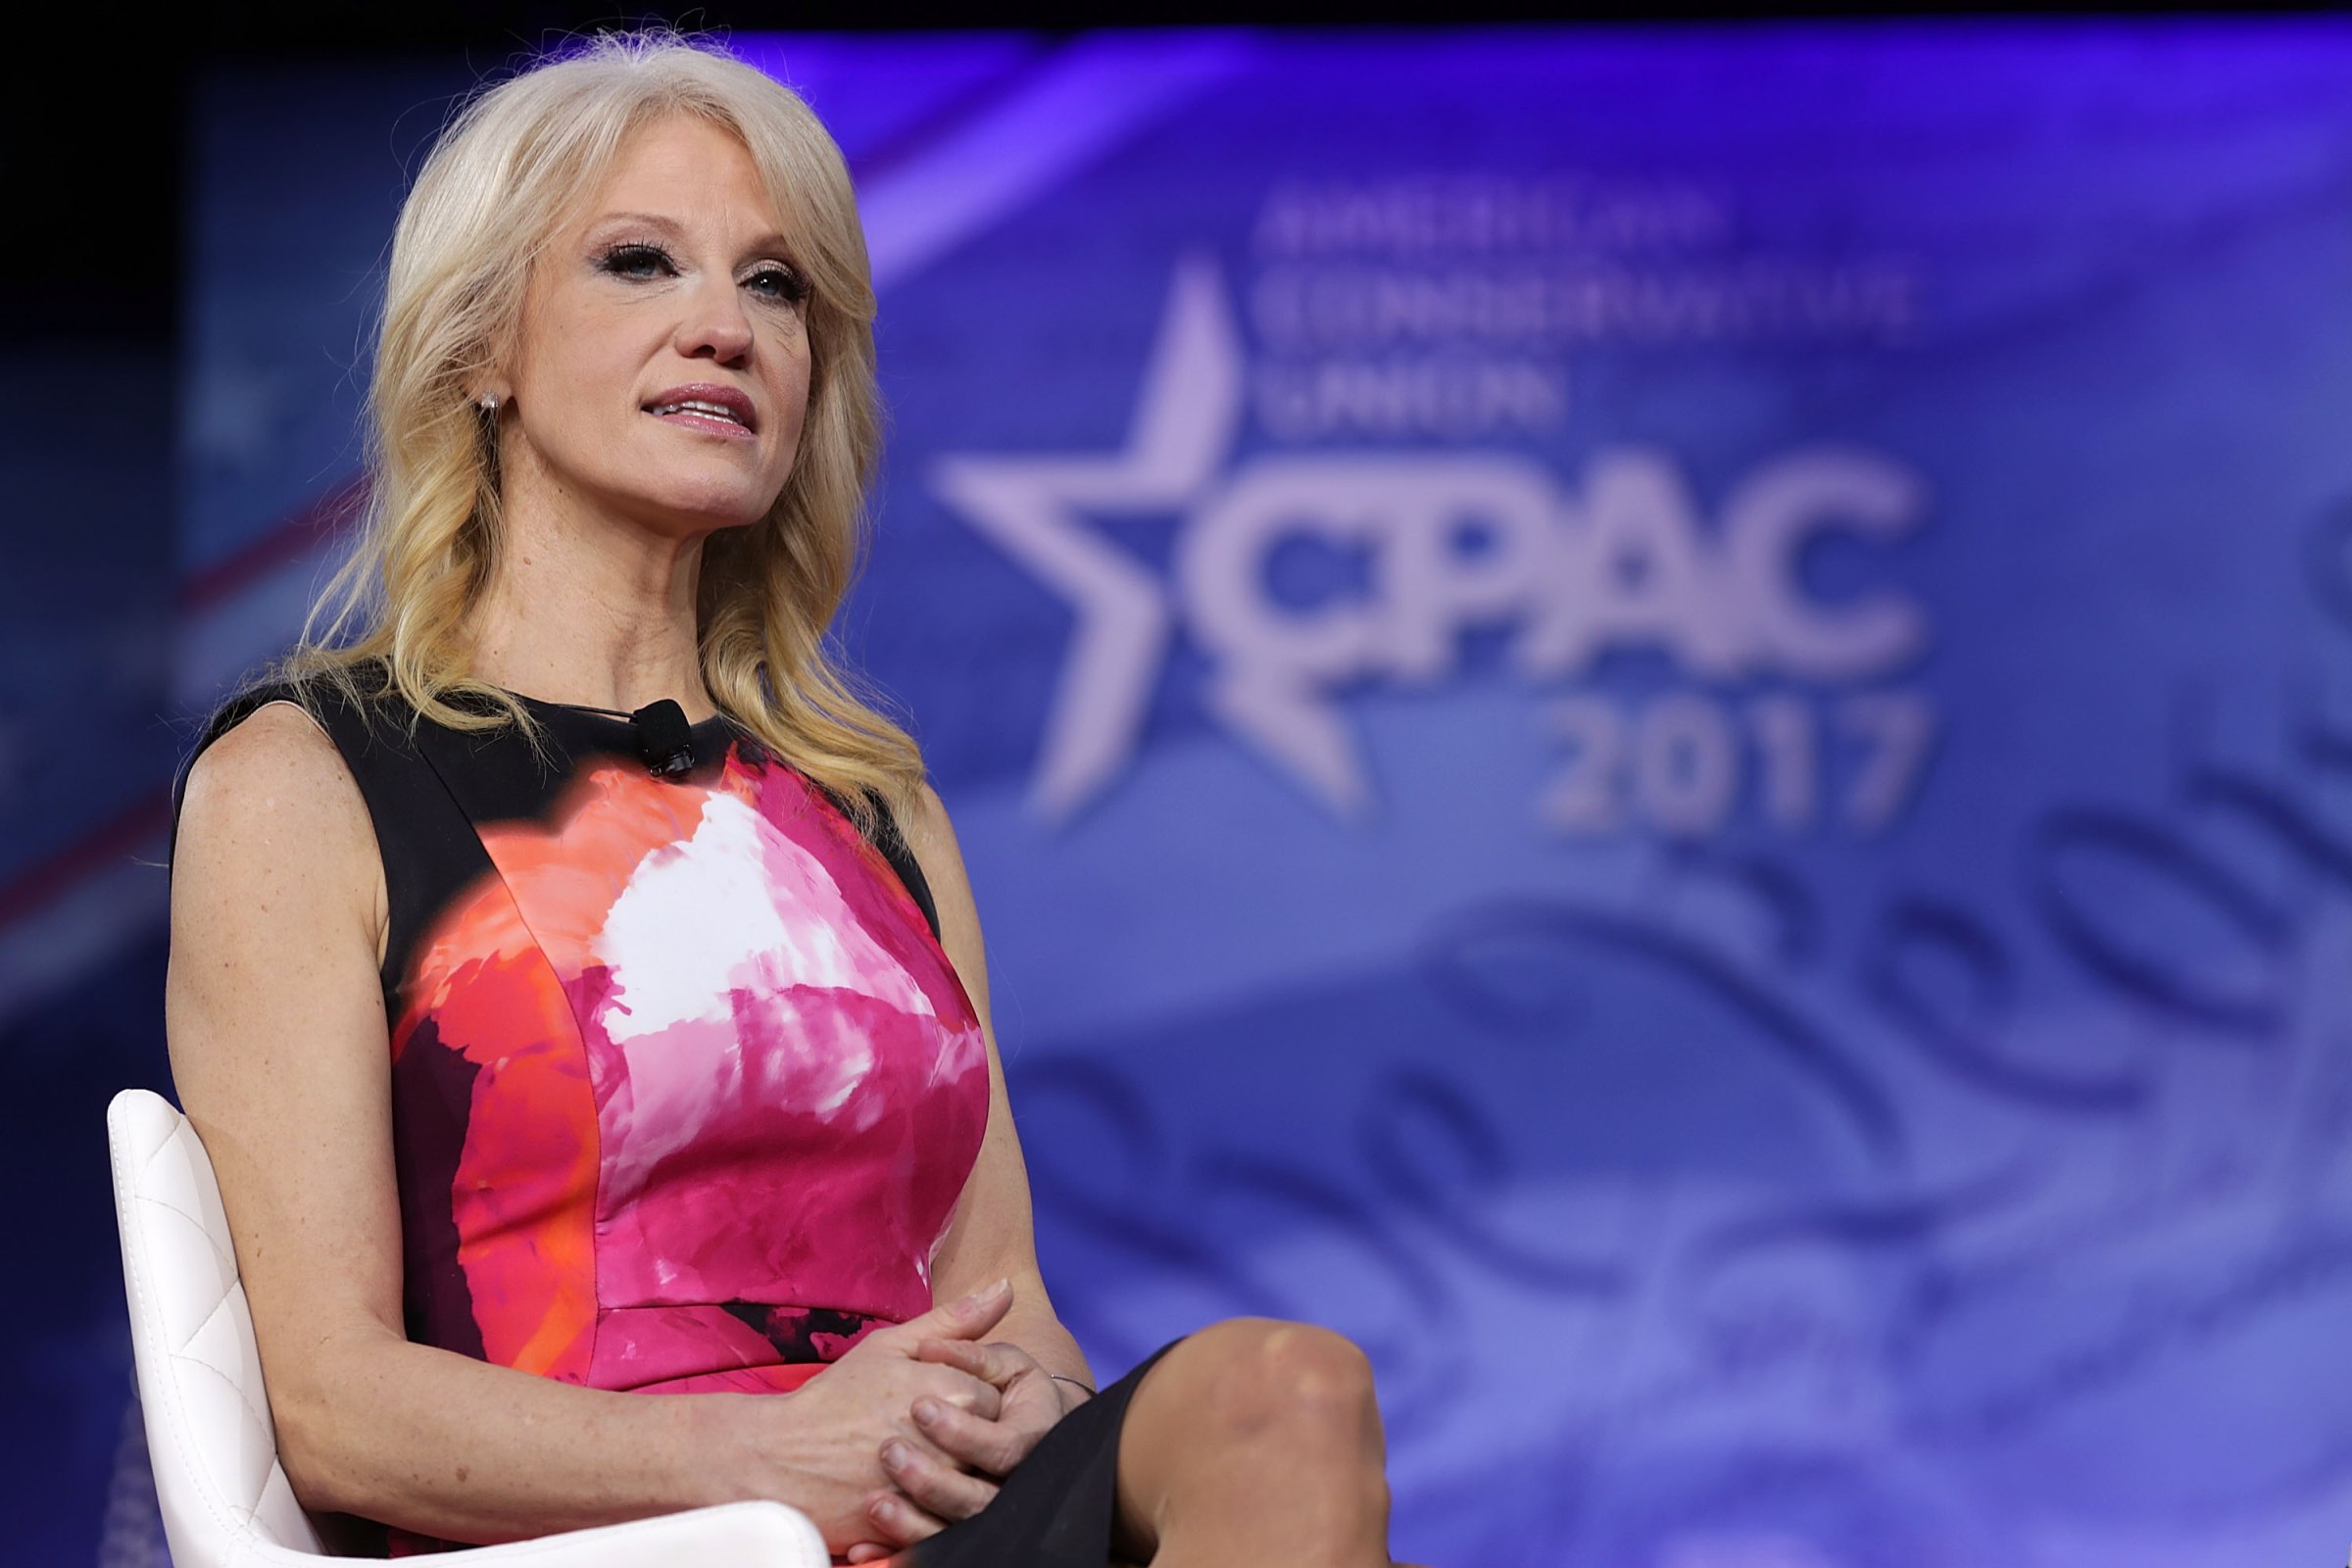 Leading Conservatives Gather For Annual CPAC Event In National Harbor, Maryland